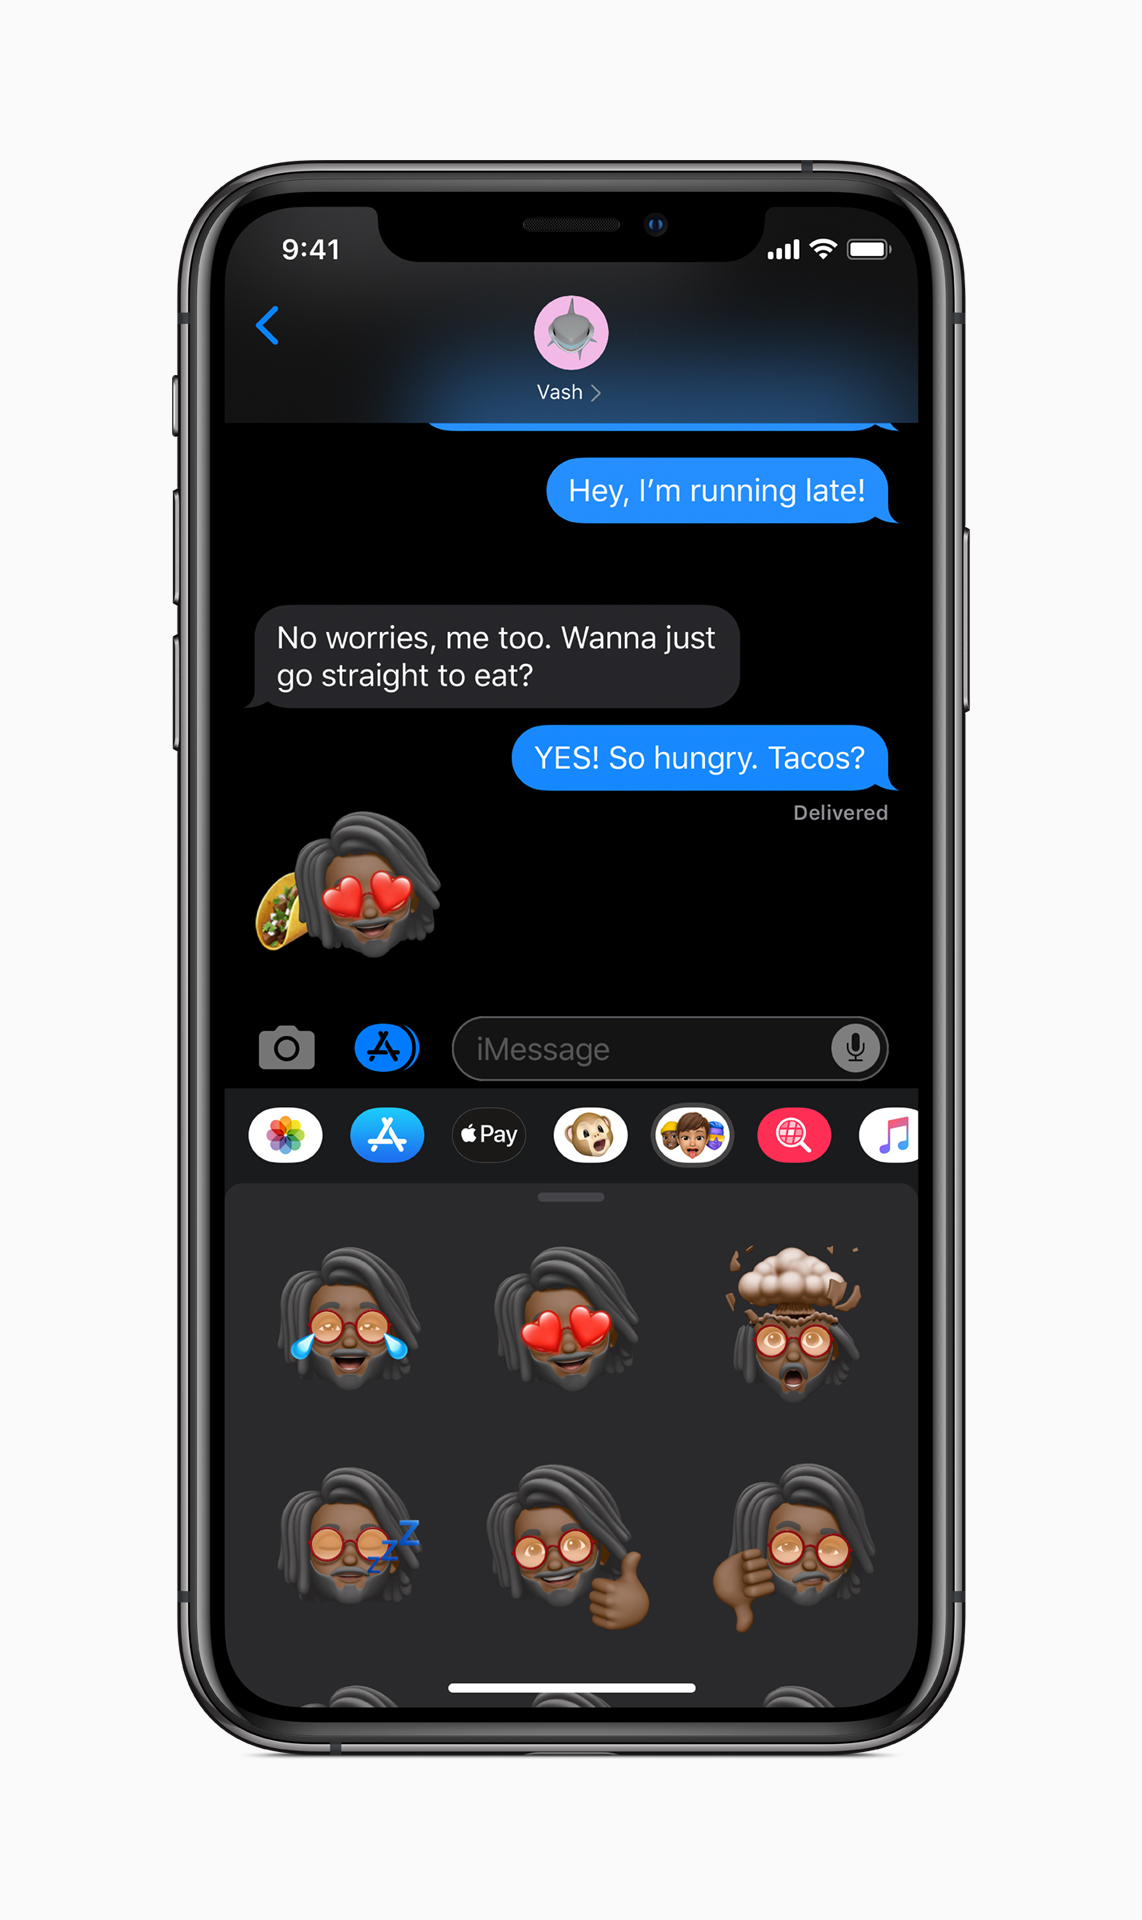 Apple Officially Unveils iOS 13